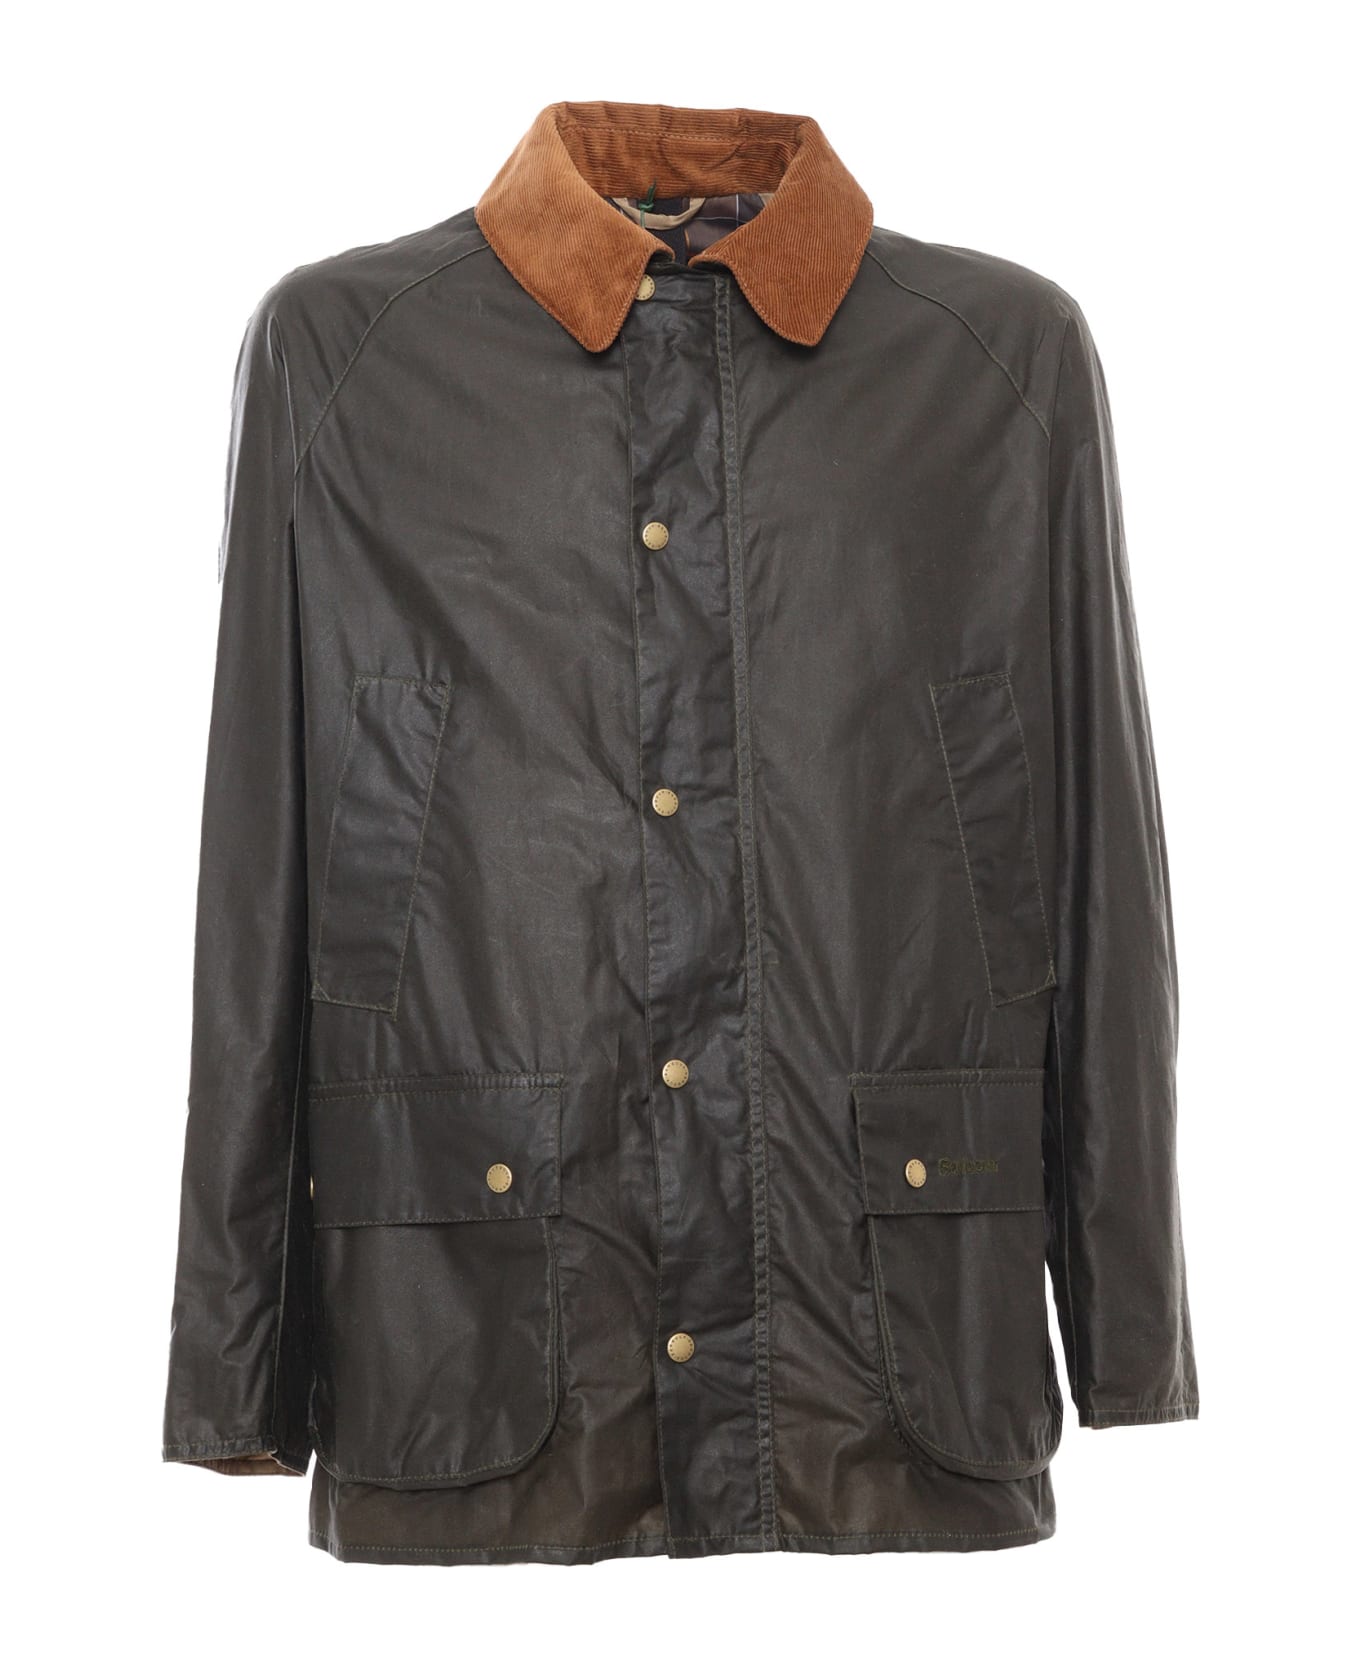 Barbour Ashby Wax Jacket - GREEN